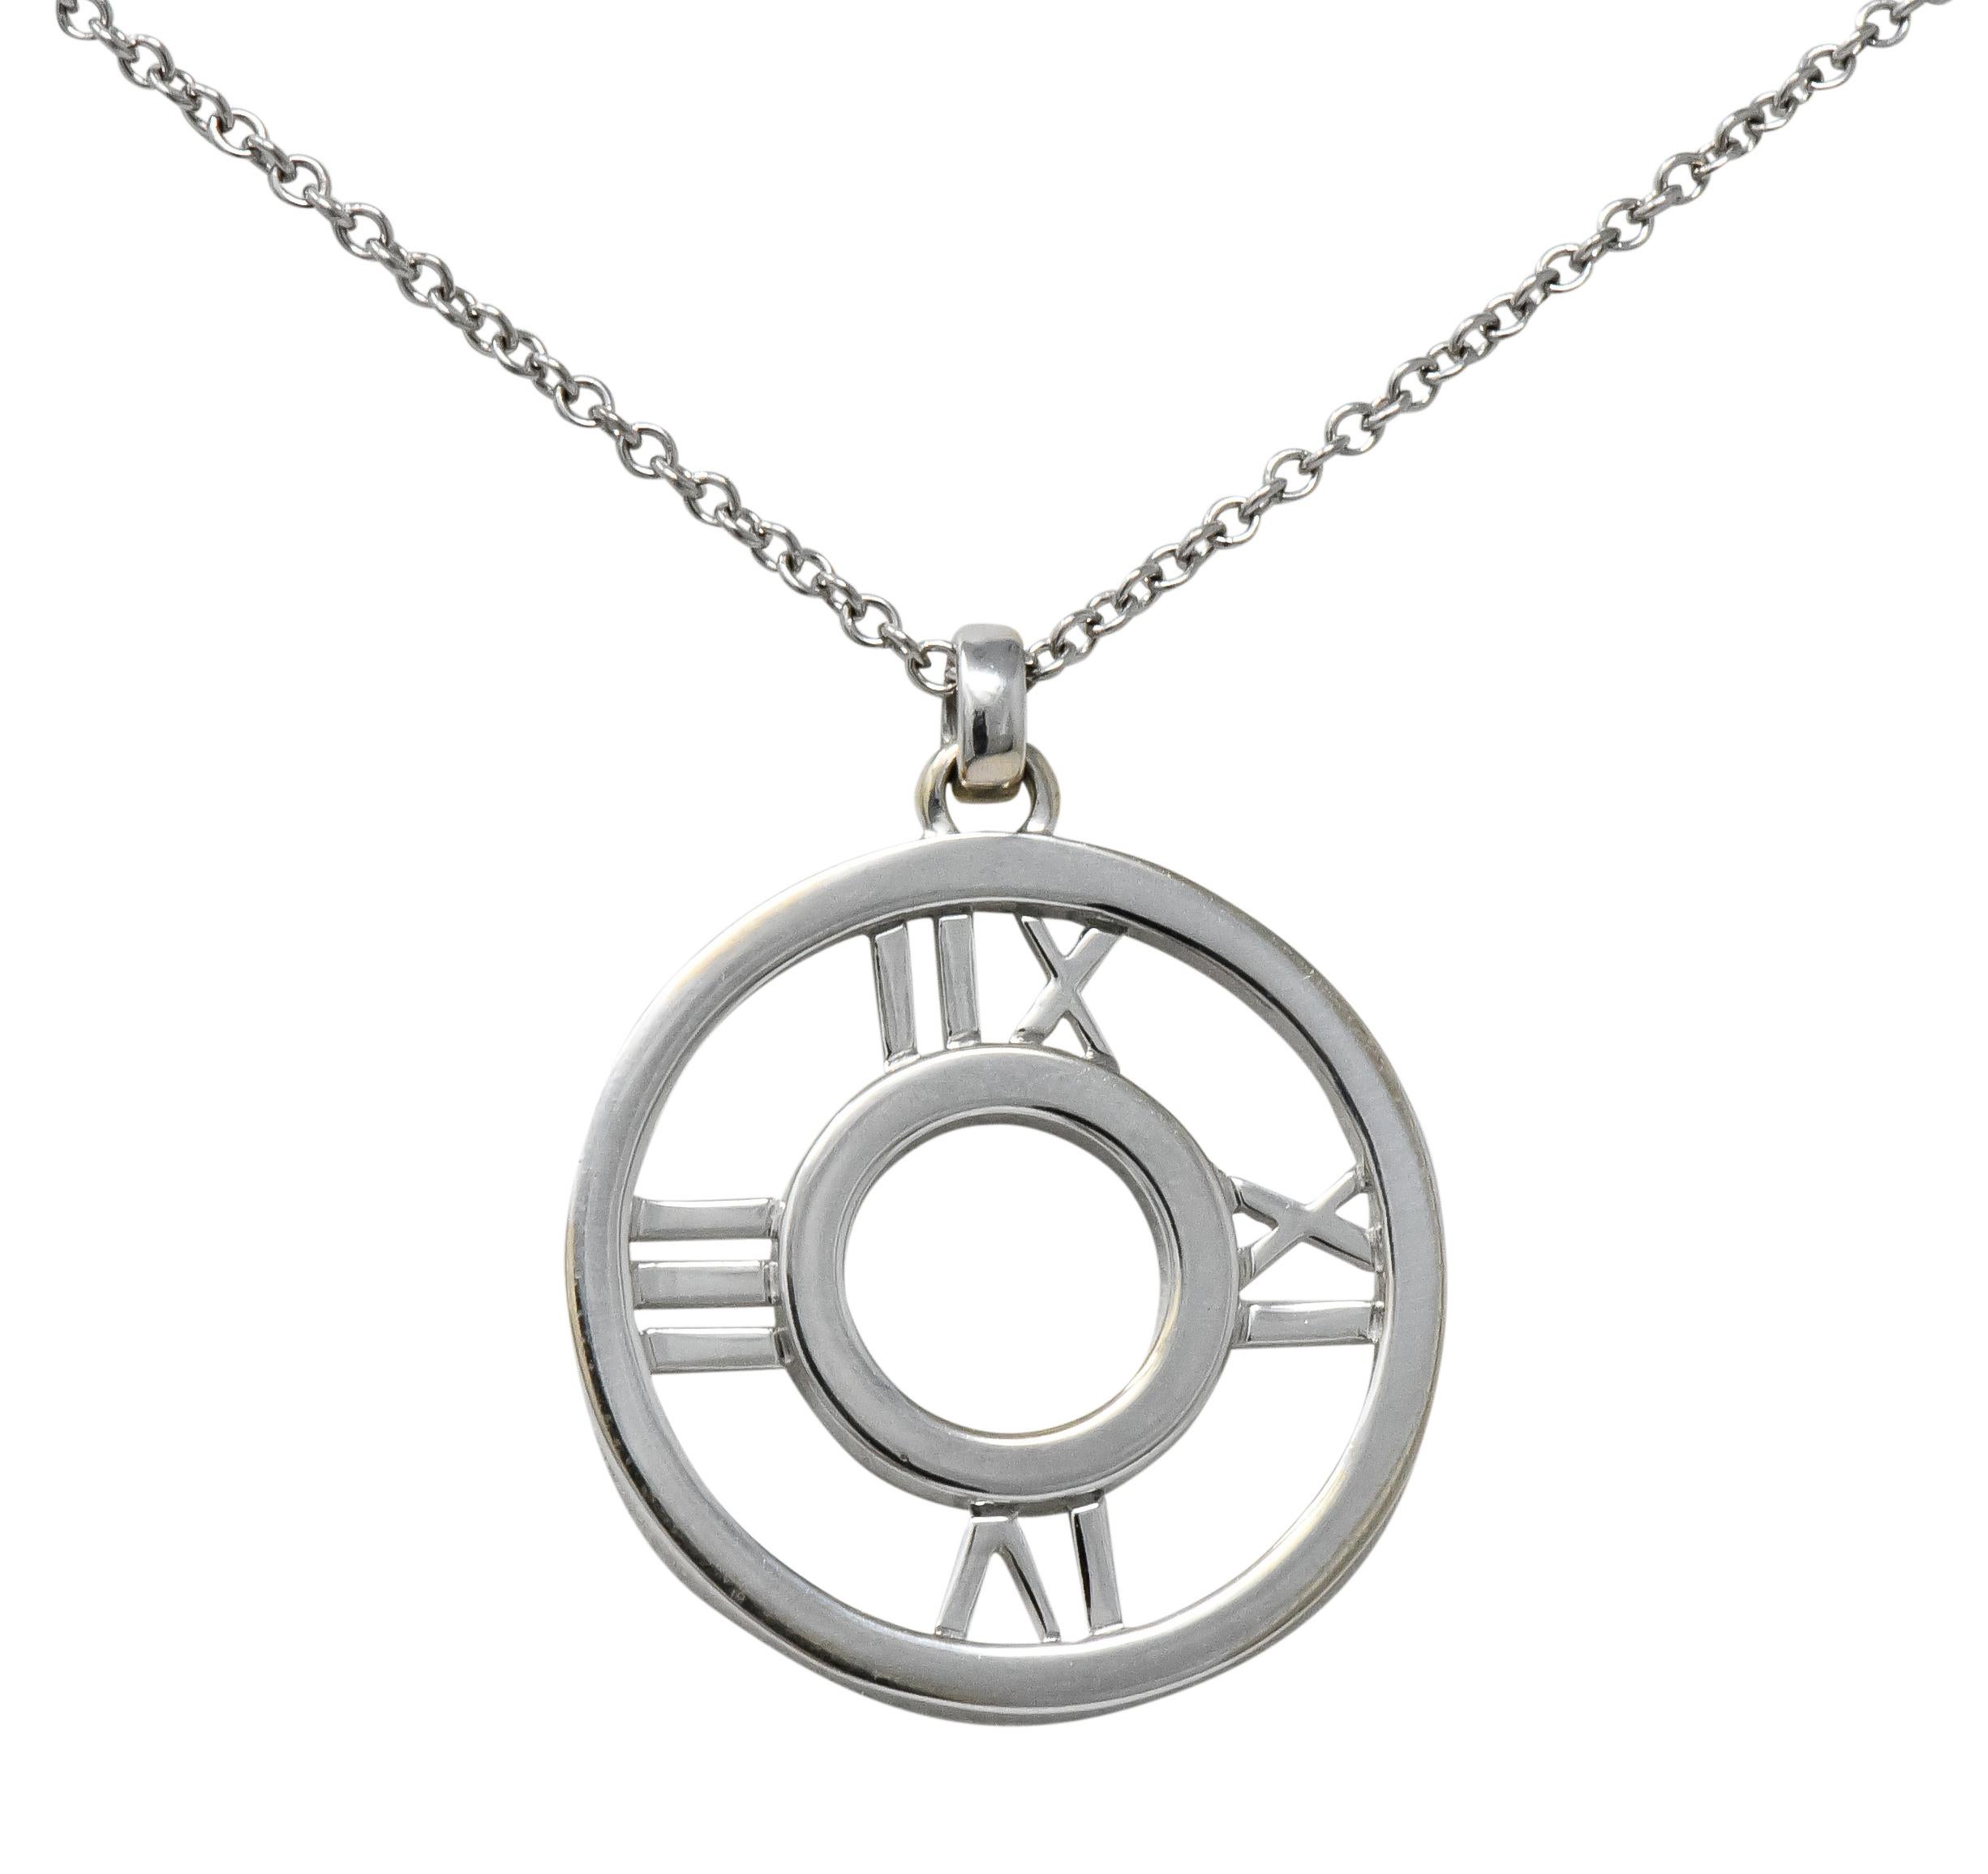 Centering a circle of bead set, round brilliant cut diamonds weighing approximately 0.30 carat, G/H color and VS to SI clarity

Surrounded by high polished Roman numerals and highly polished circle and bale

Accompanied by white gold cable chain